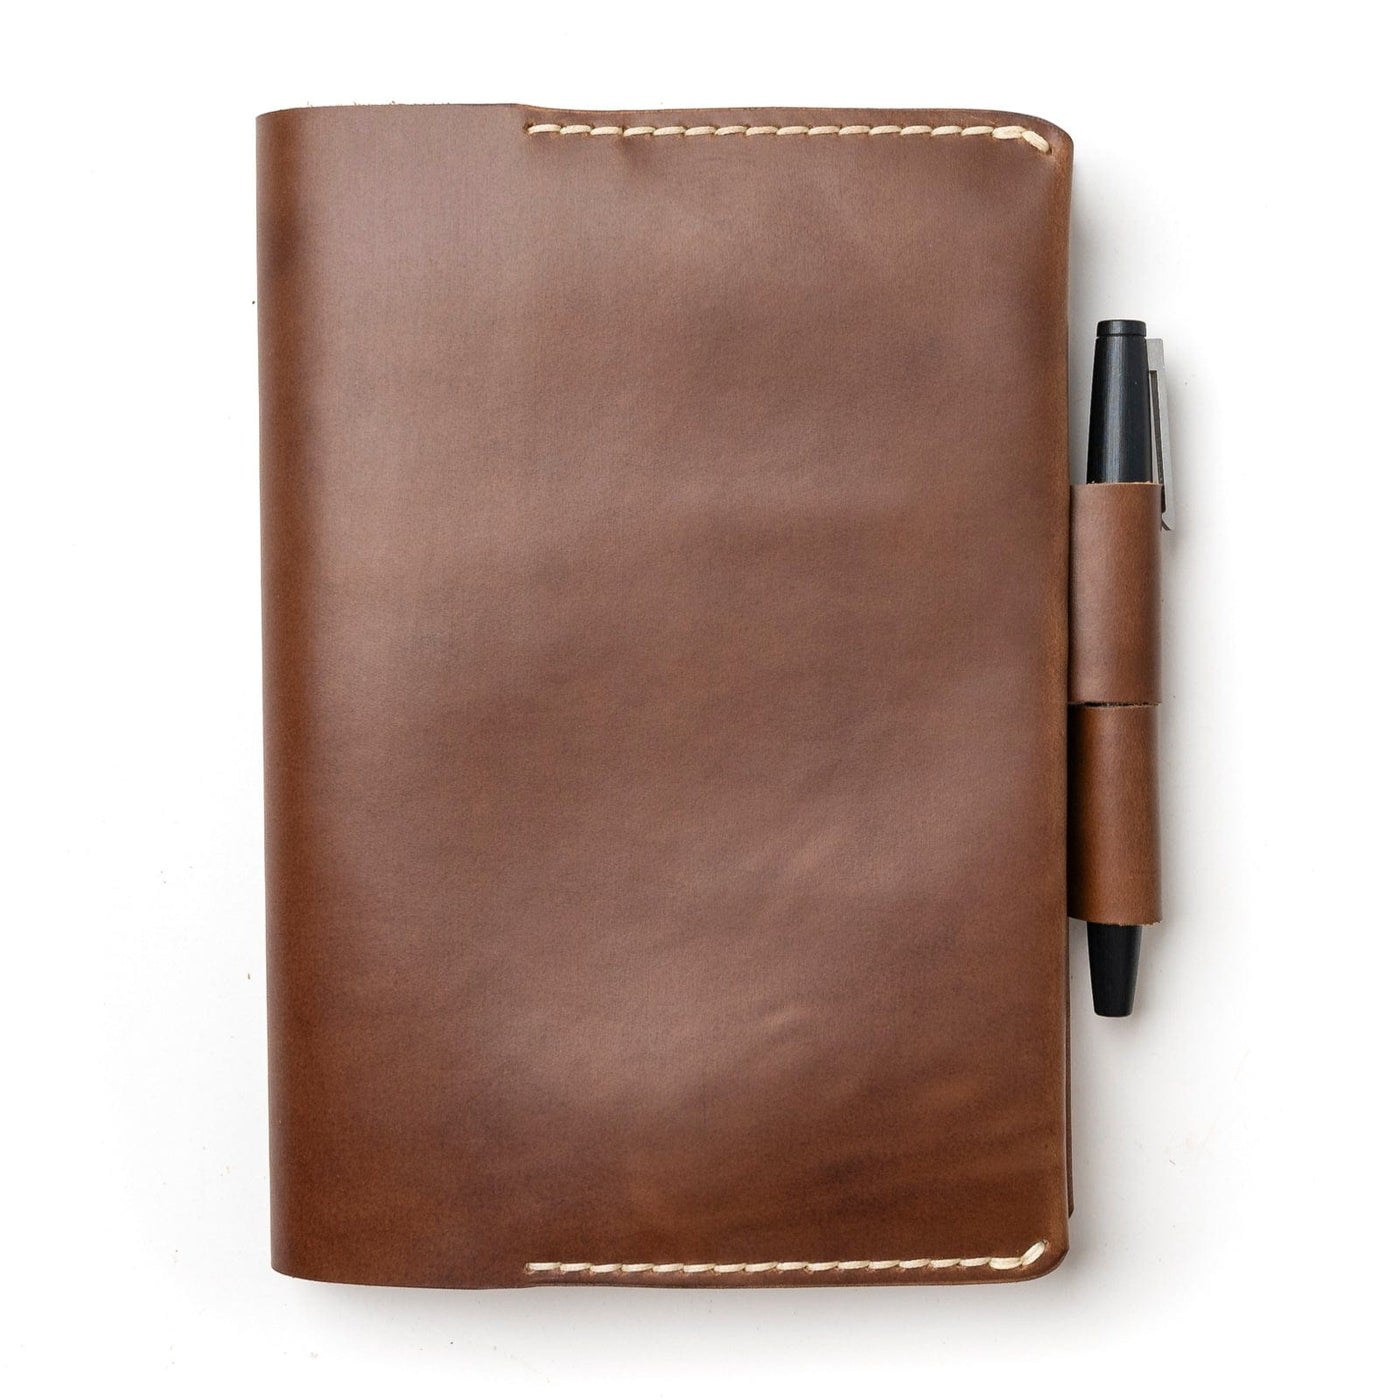 Leather A5 Notebook Cover - Natural Popov Leather